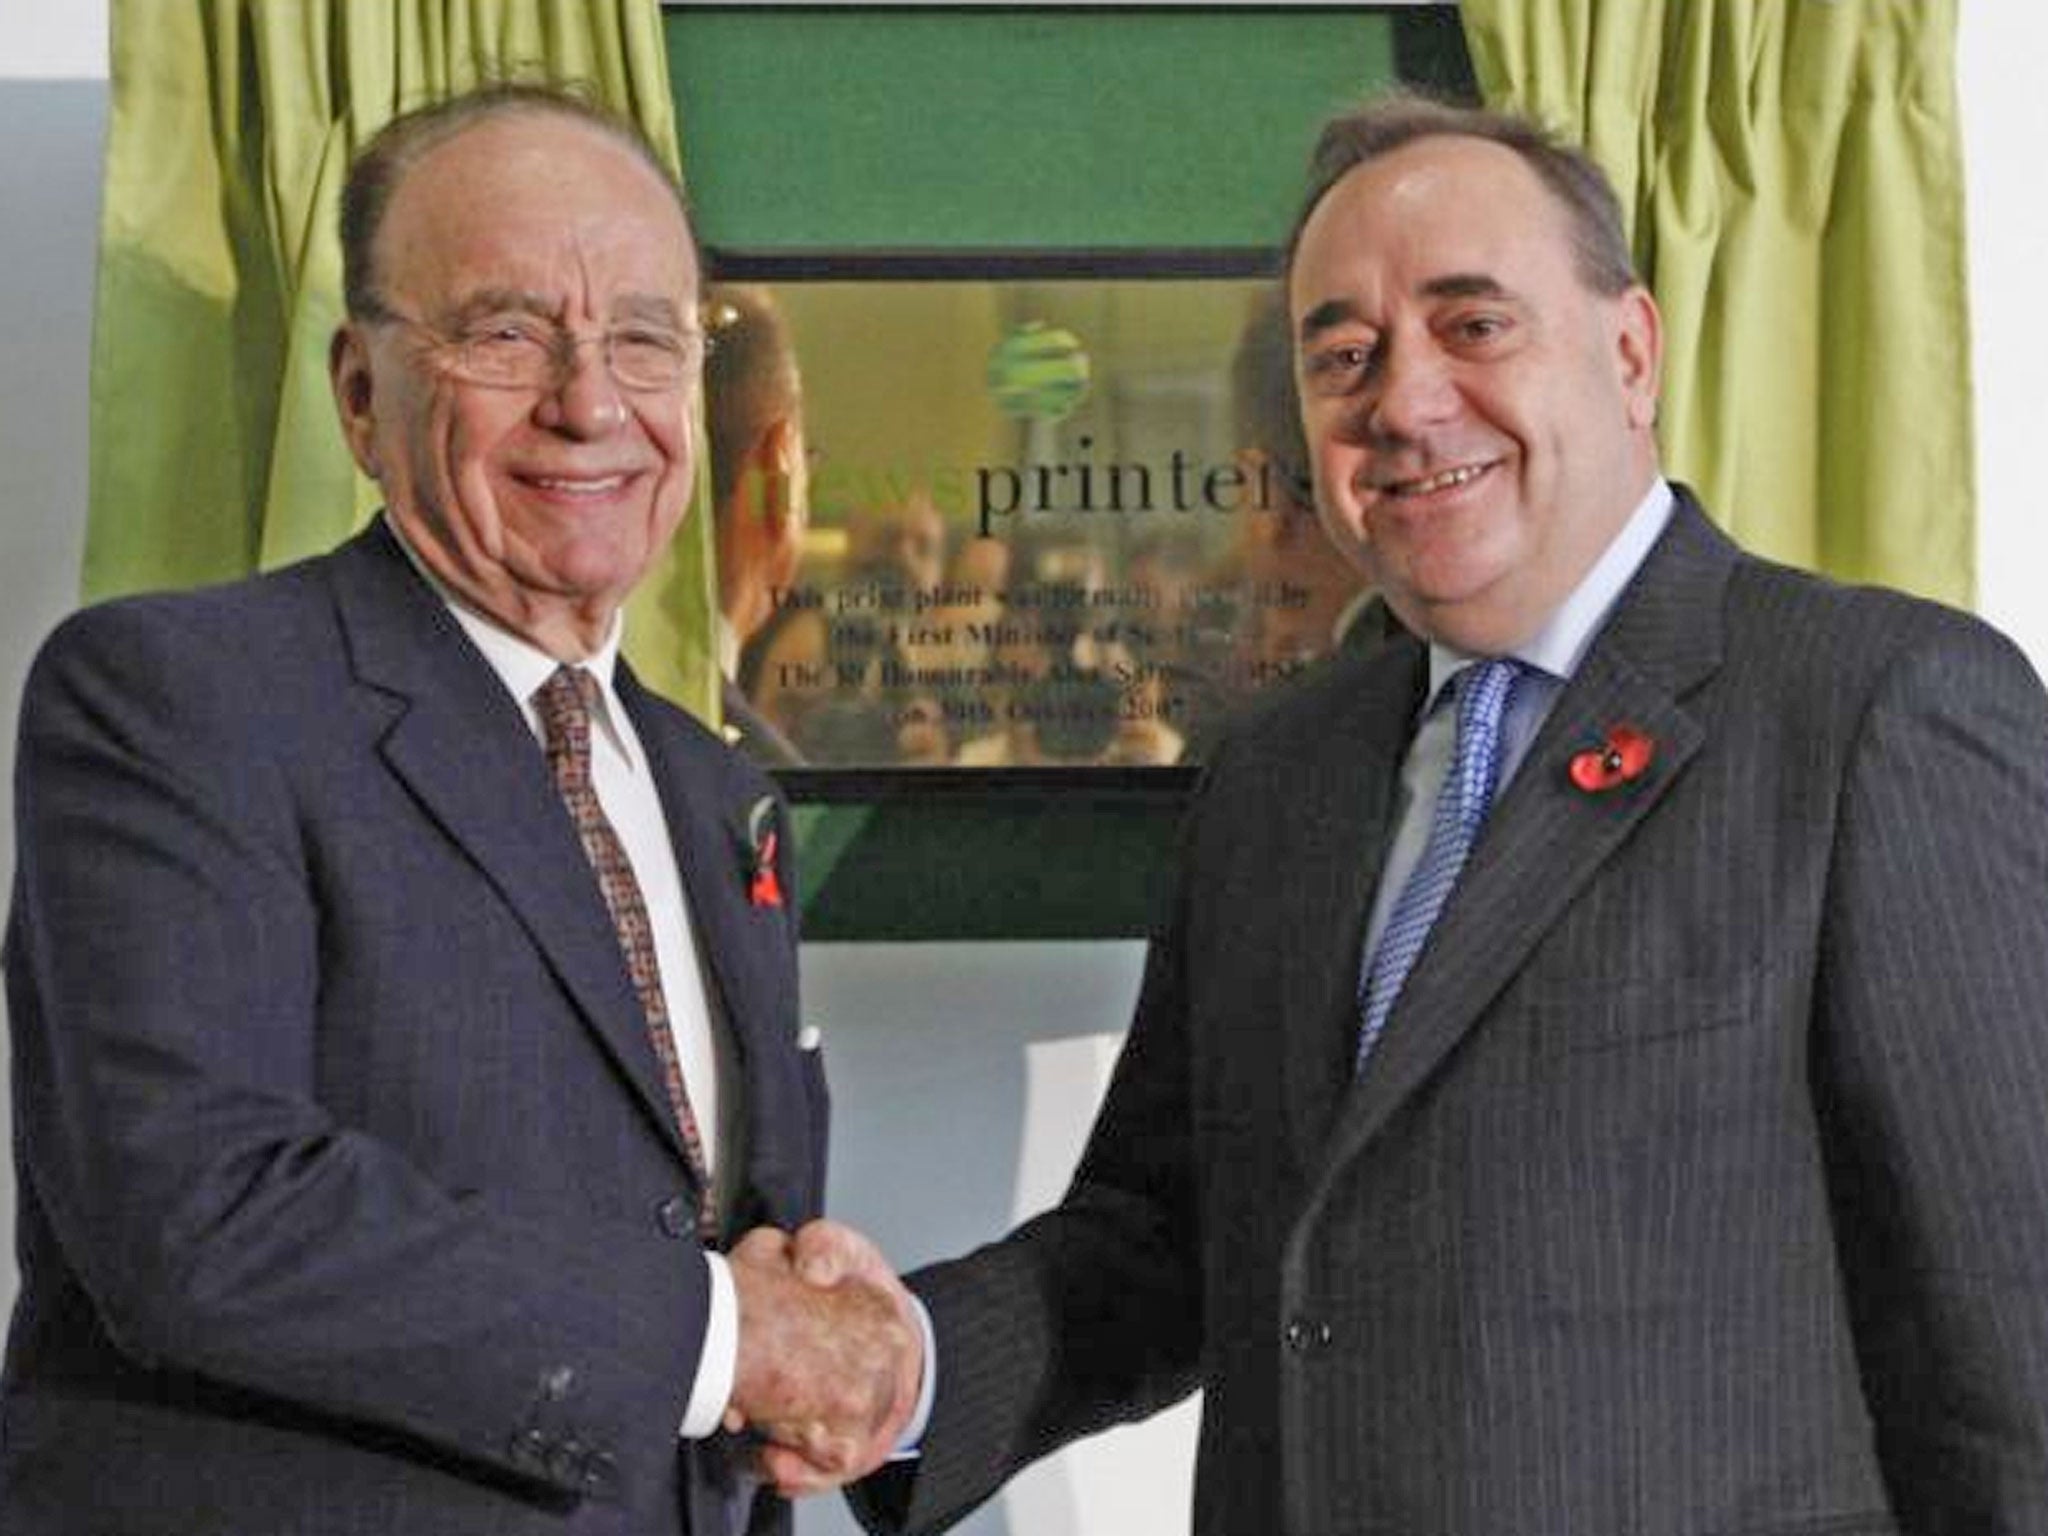 Rupert Murdoch had previously referred to Alex Salmond as ‘the most brilliant politician in the UK’